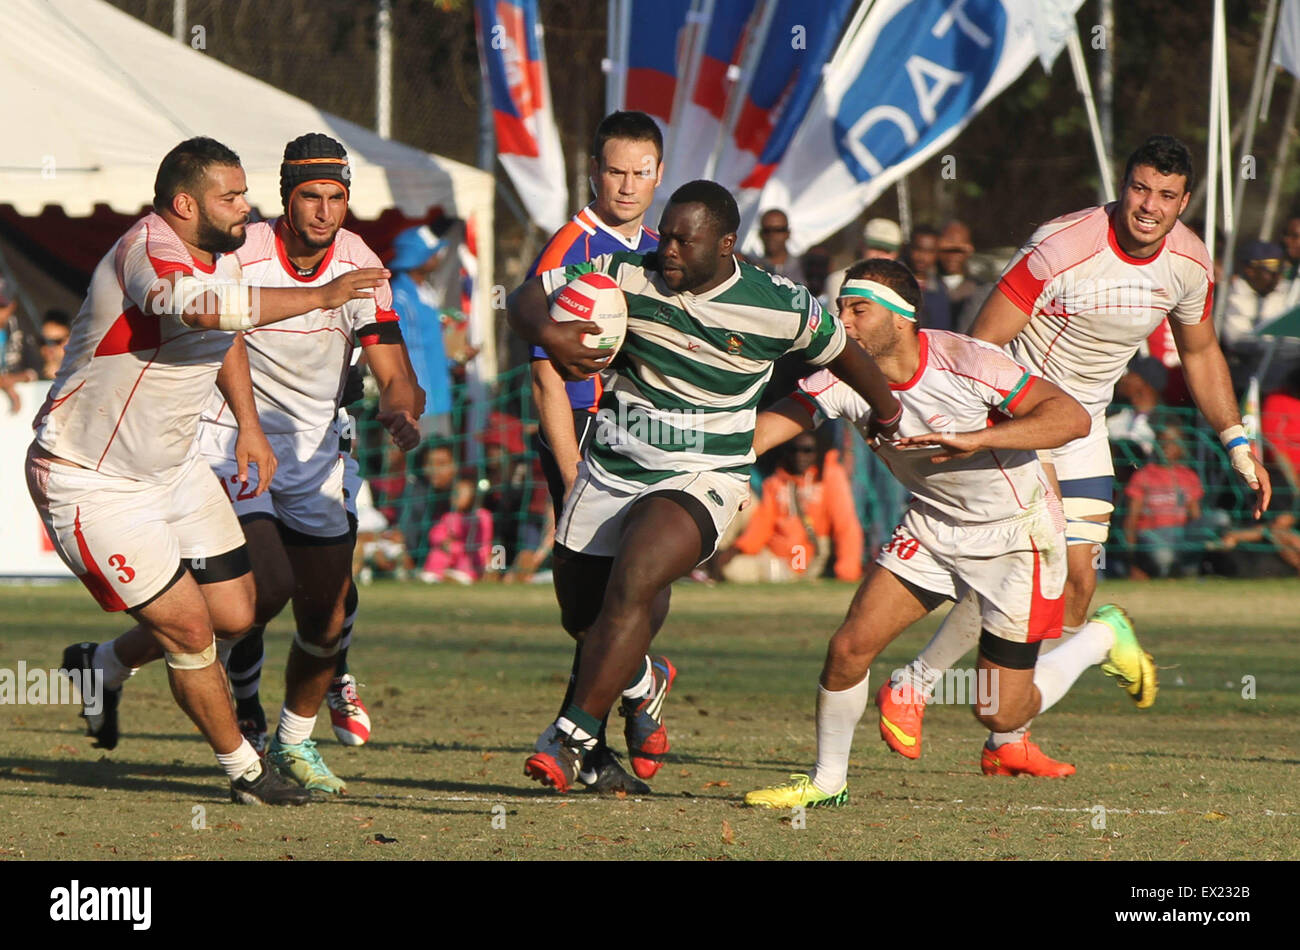 Harare, Zimbabwe. 4th July, 2015. Zimbabwean lock player Njabulo Ndlovu (C) competes during an Africa Rugby Cup Group 1A match against Tunisia at the Prince Edward School ground in Harare, Zimbabwe, July 4, 2015. Zimbabwe won 19-8. © Stringer/Xinhua/Alamy Live News Stock Photo